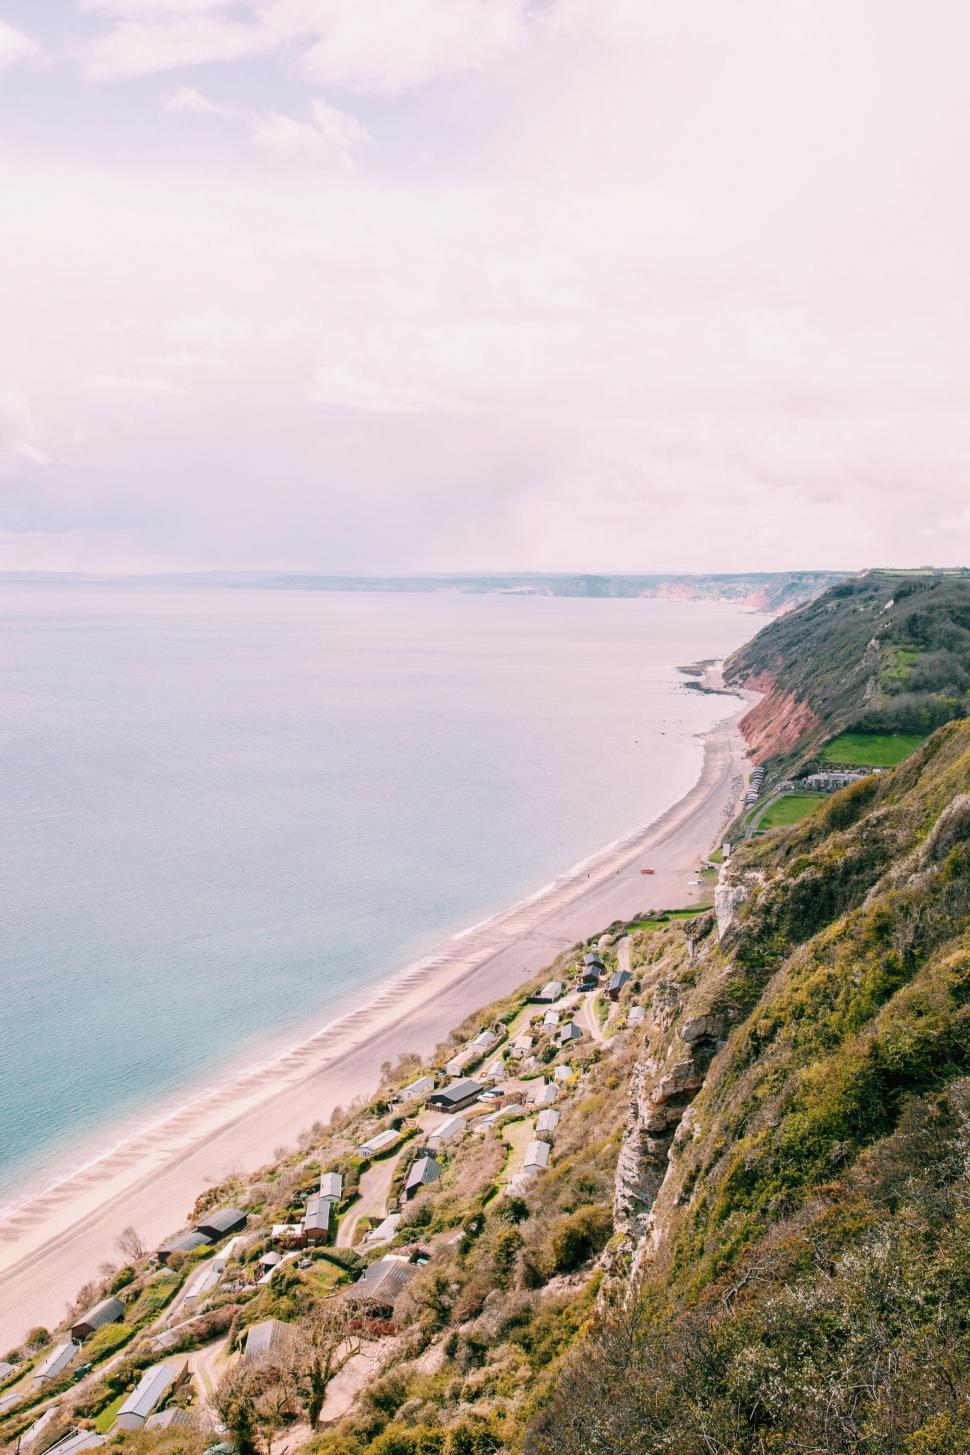 Free Image of Overlooking a Beach From a Hill 